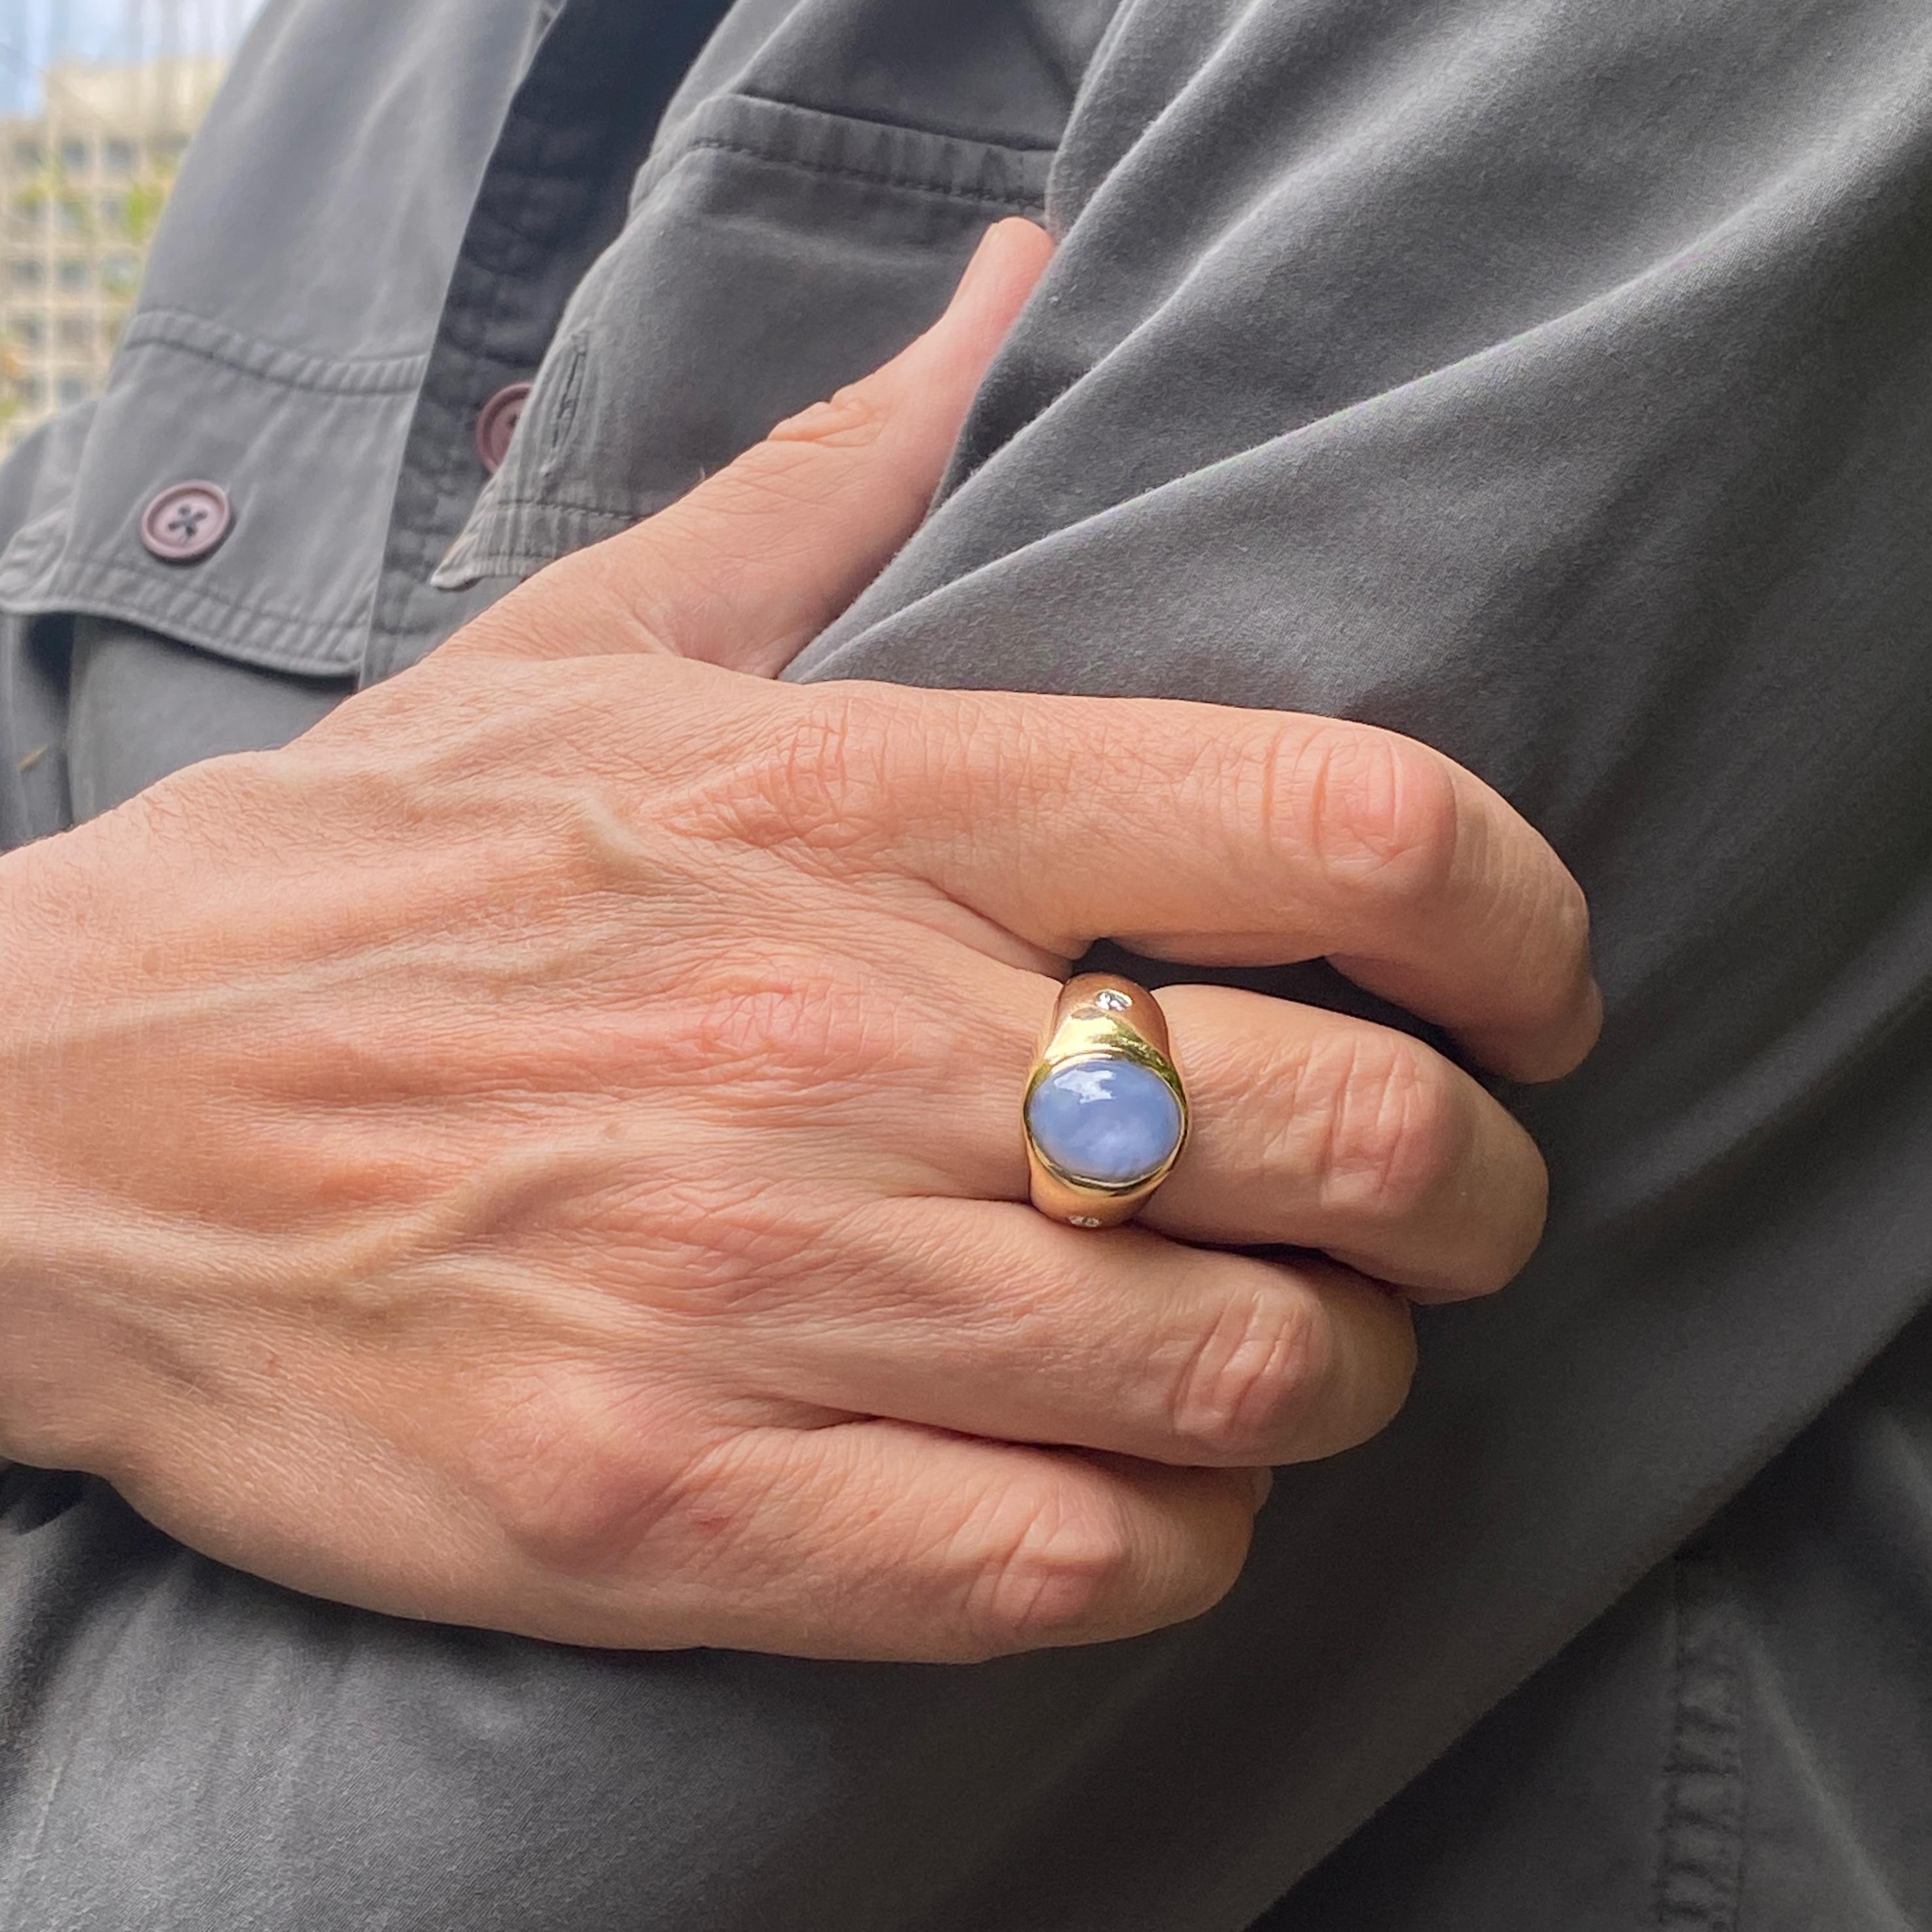 This amazing ring, made here in our shop by Eytan Brandes, features a large natural and untreated high-dome oval star sapphire cabochon.  The stone was the centerpiece of a 1950s diamond starburst cocktail ring, but Eytan wanted to make a modern